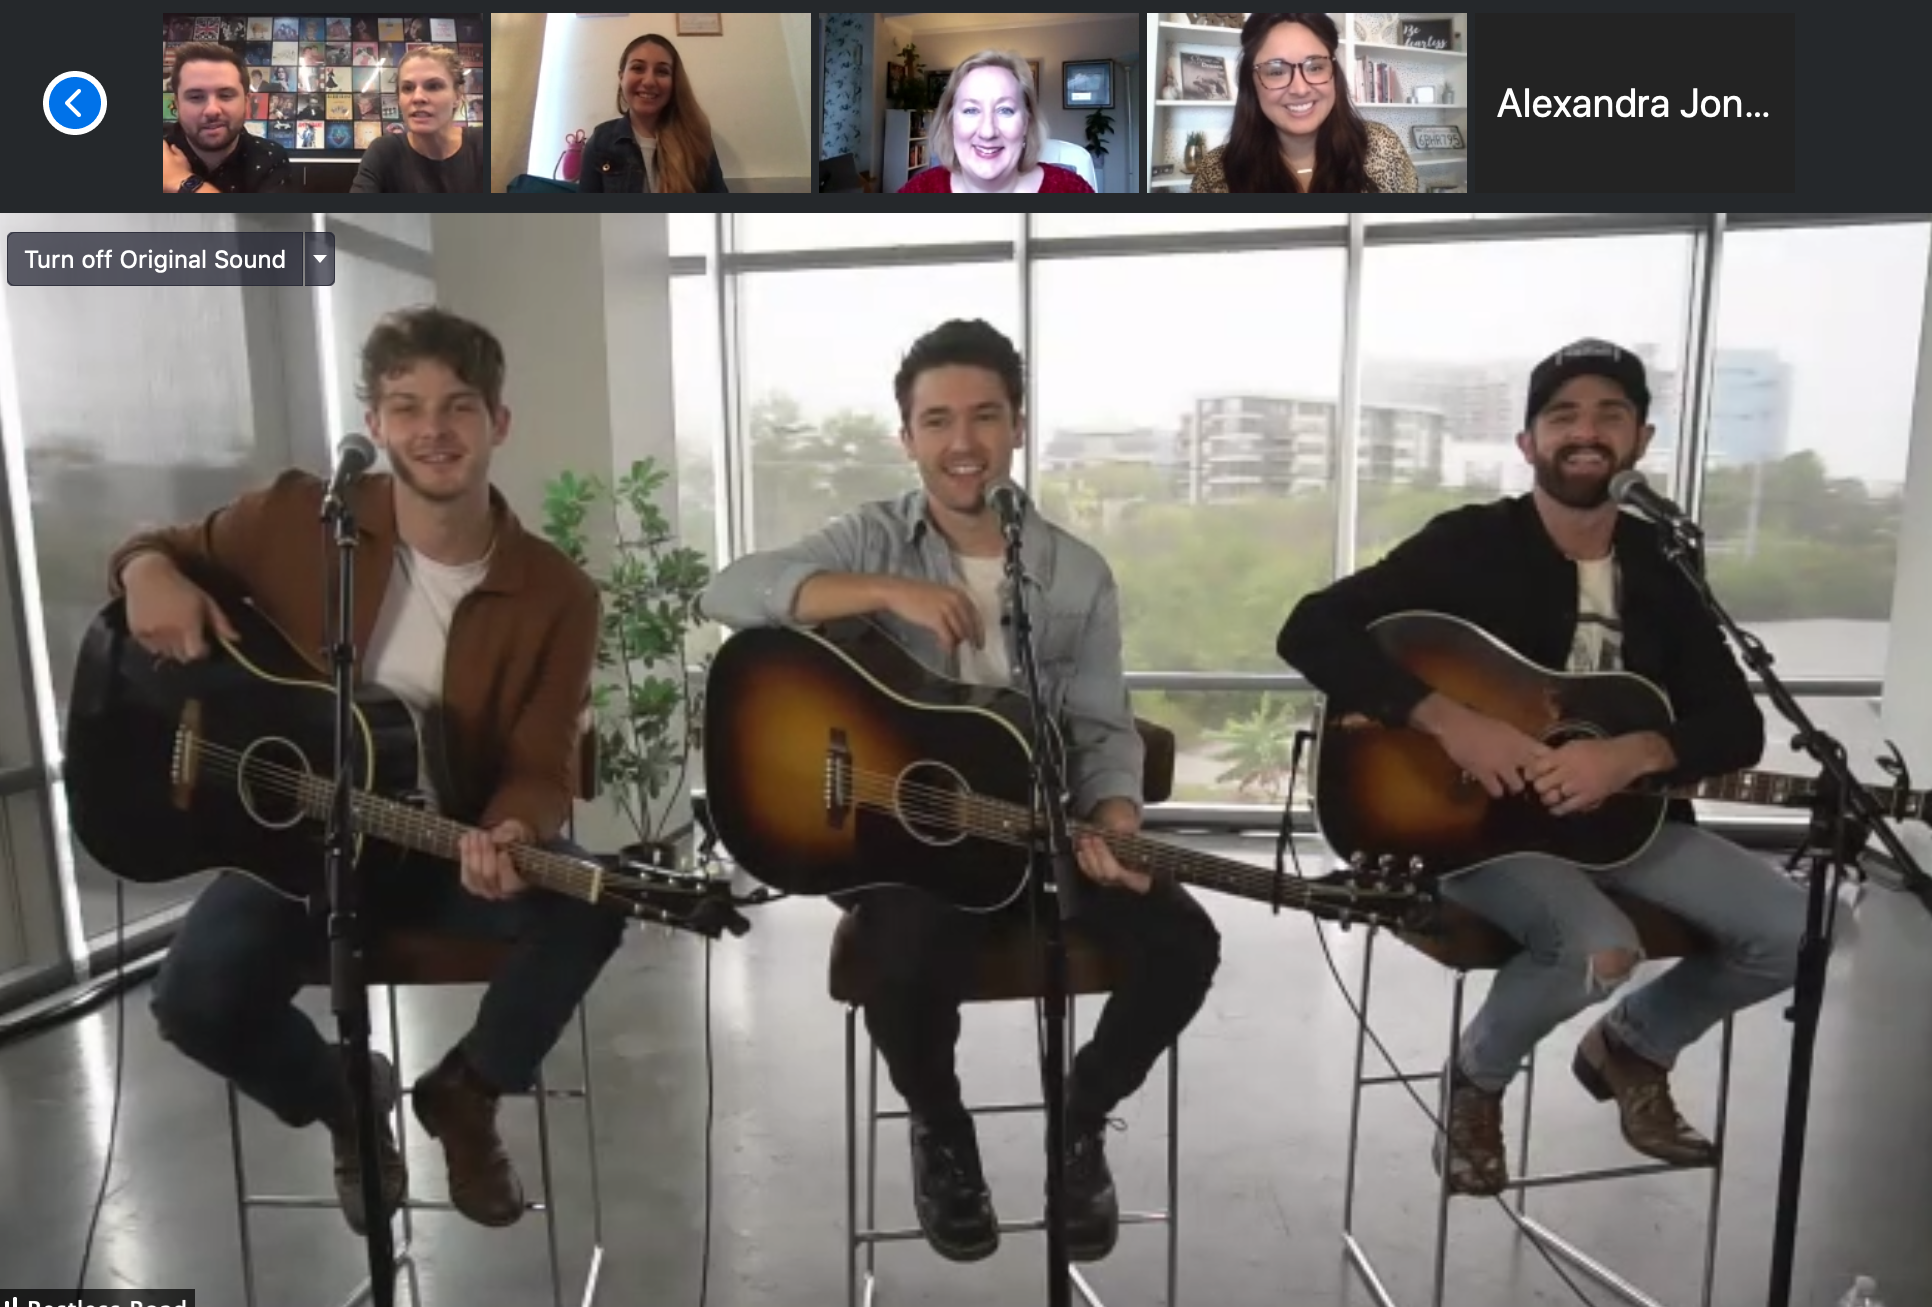 Restless Road, EFG Management, All Access